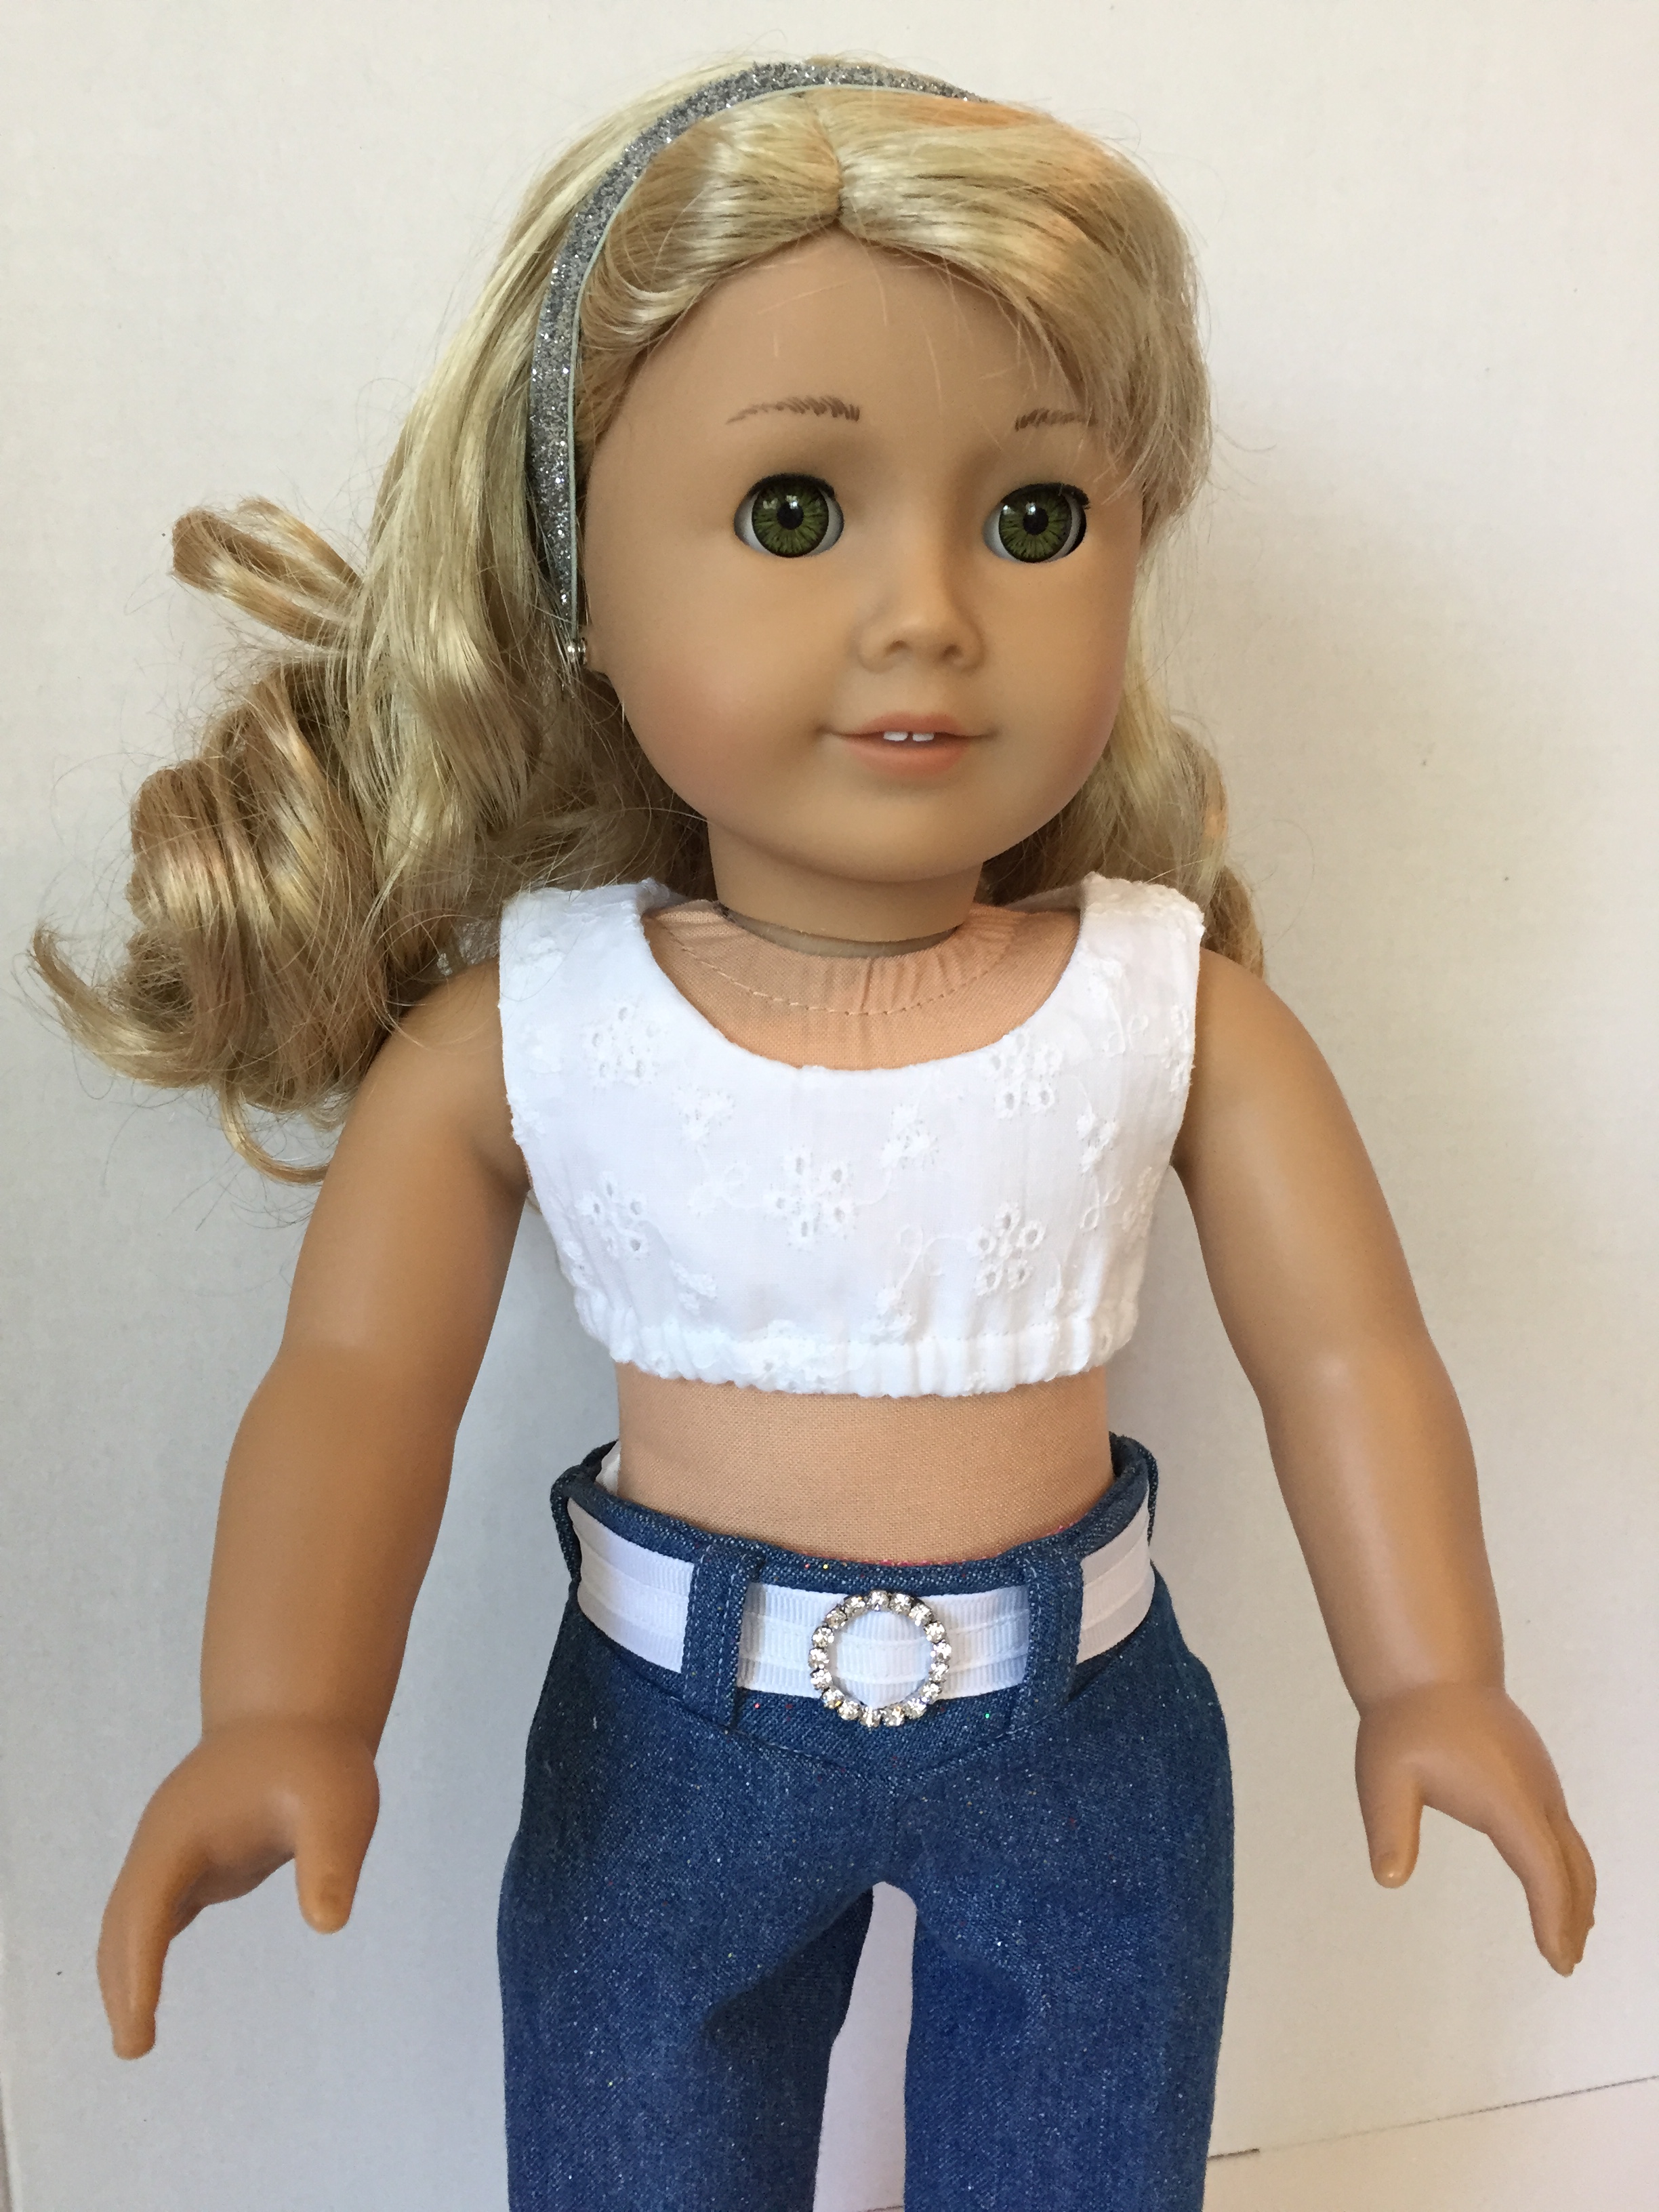 Make a cute midriff crop top for 18 inch dolls with the easy Popsicle Top PDF sewing pattern by OhSewKat.